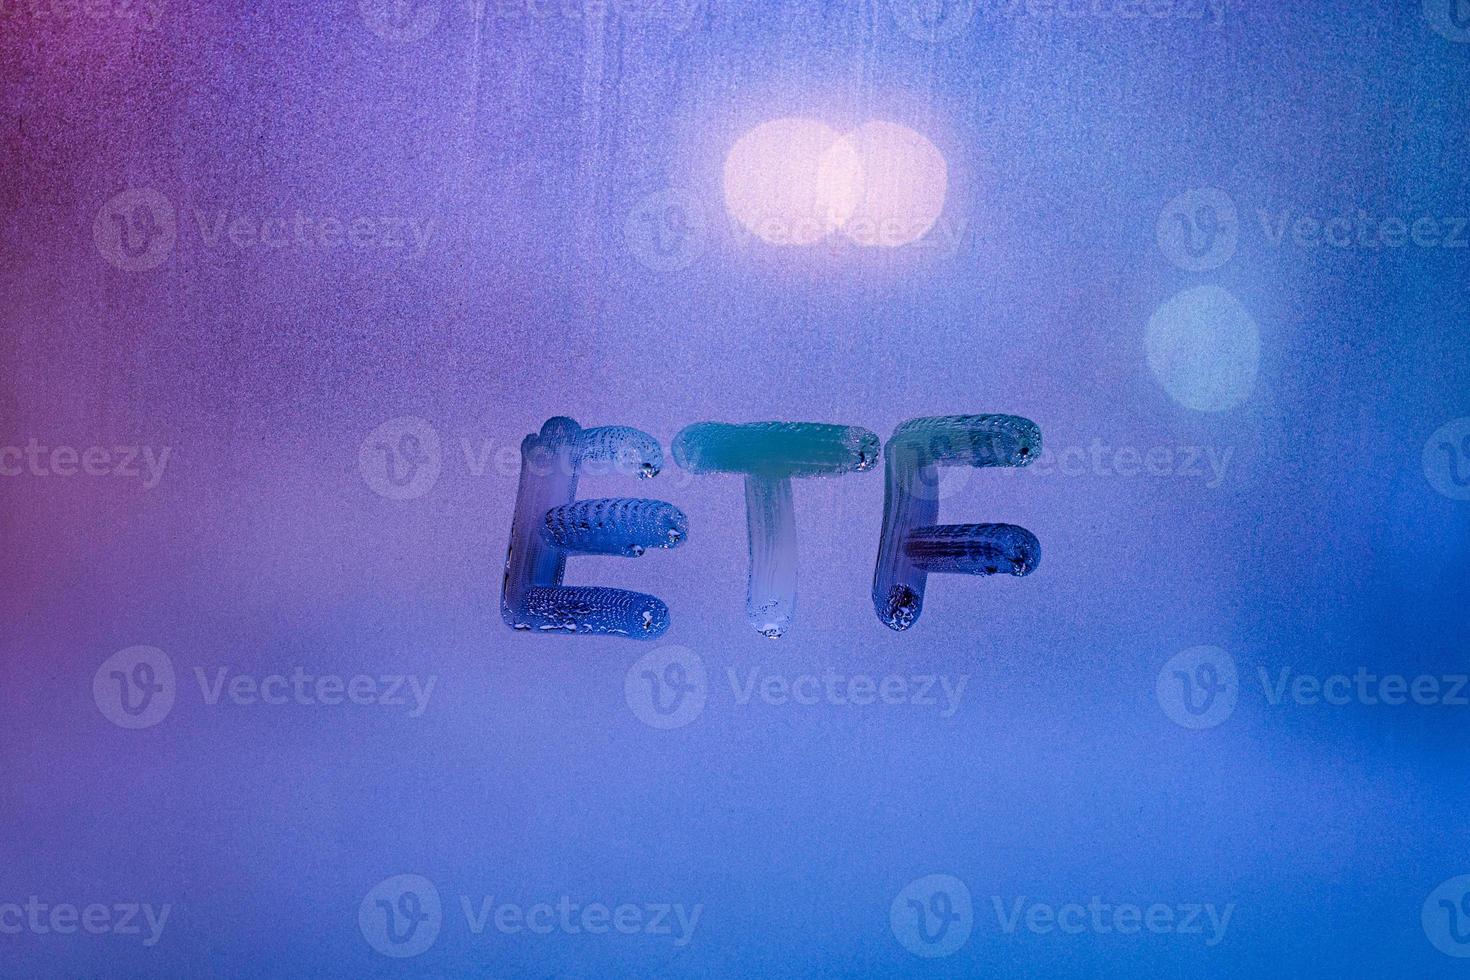 abbreviation word etf - exchange traded funds - handwritten on foggy glass window at night with neon blue back street light photo